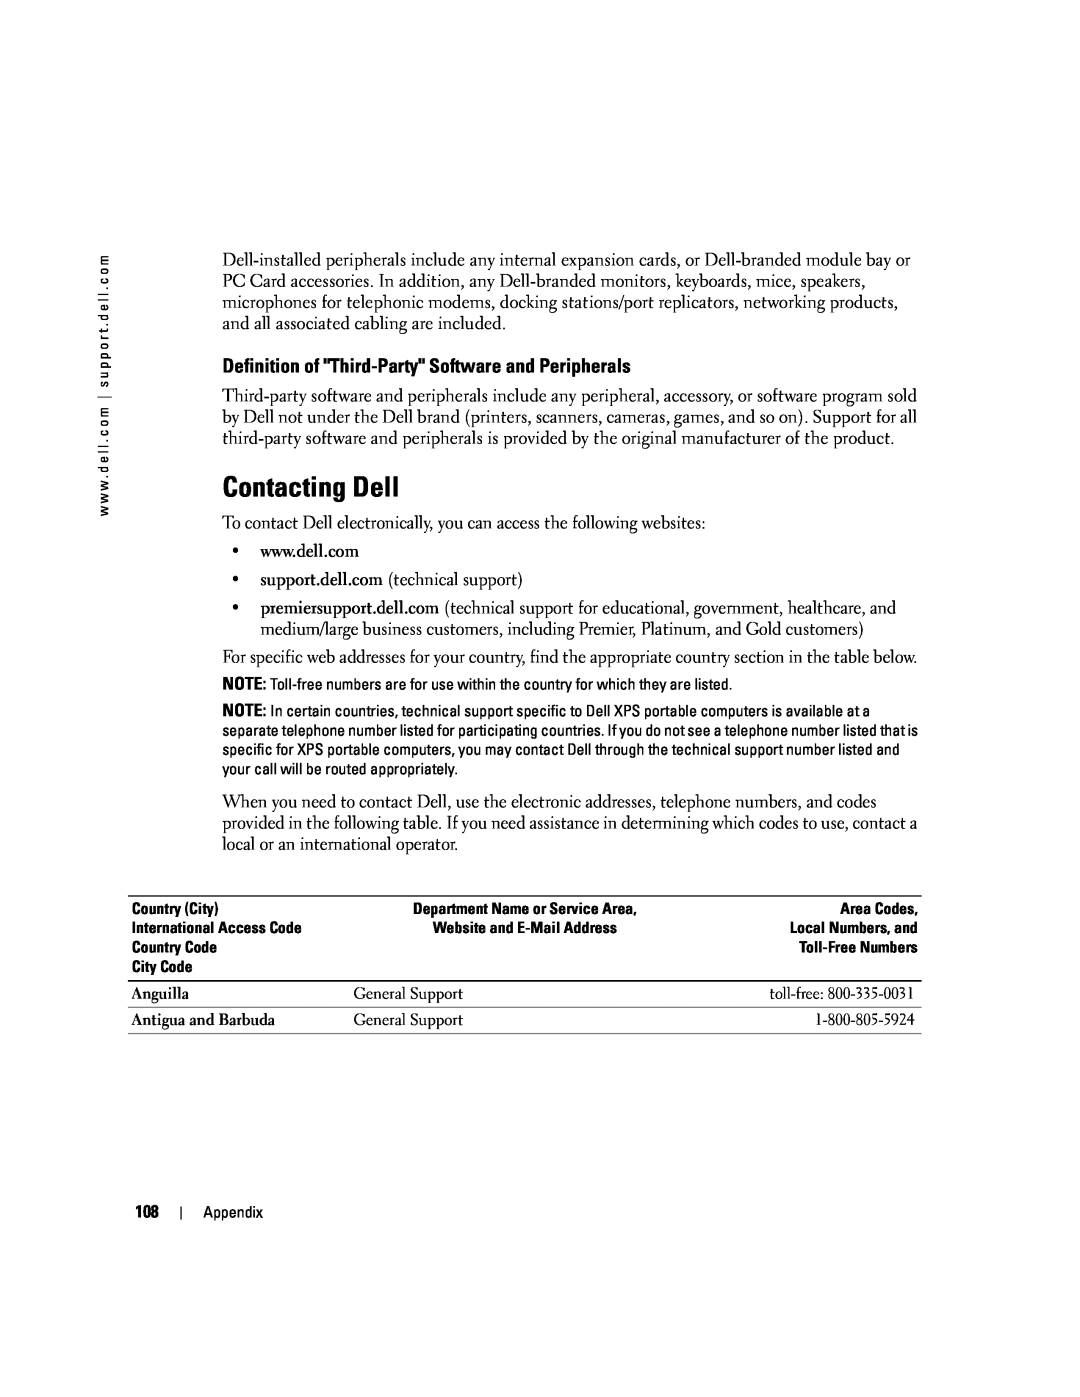 Dell 9300 owner manual Contacting Dell, Definition of Third-Party Software and Peripherals 